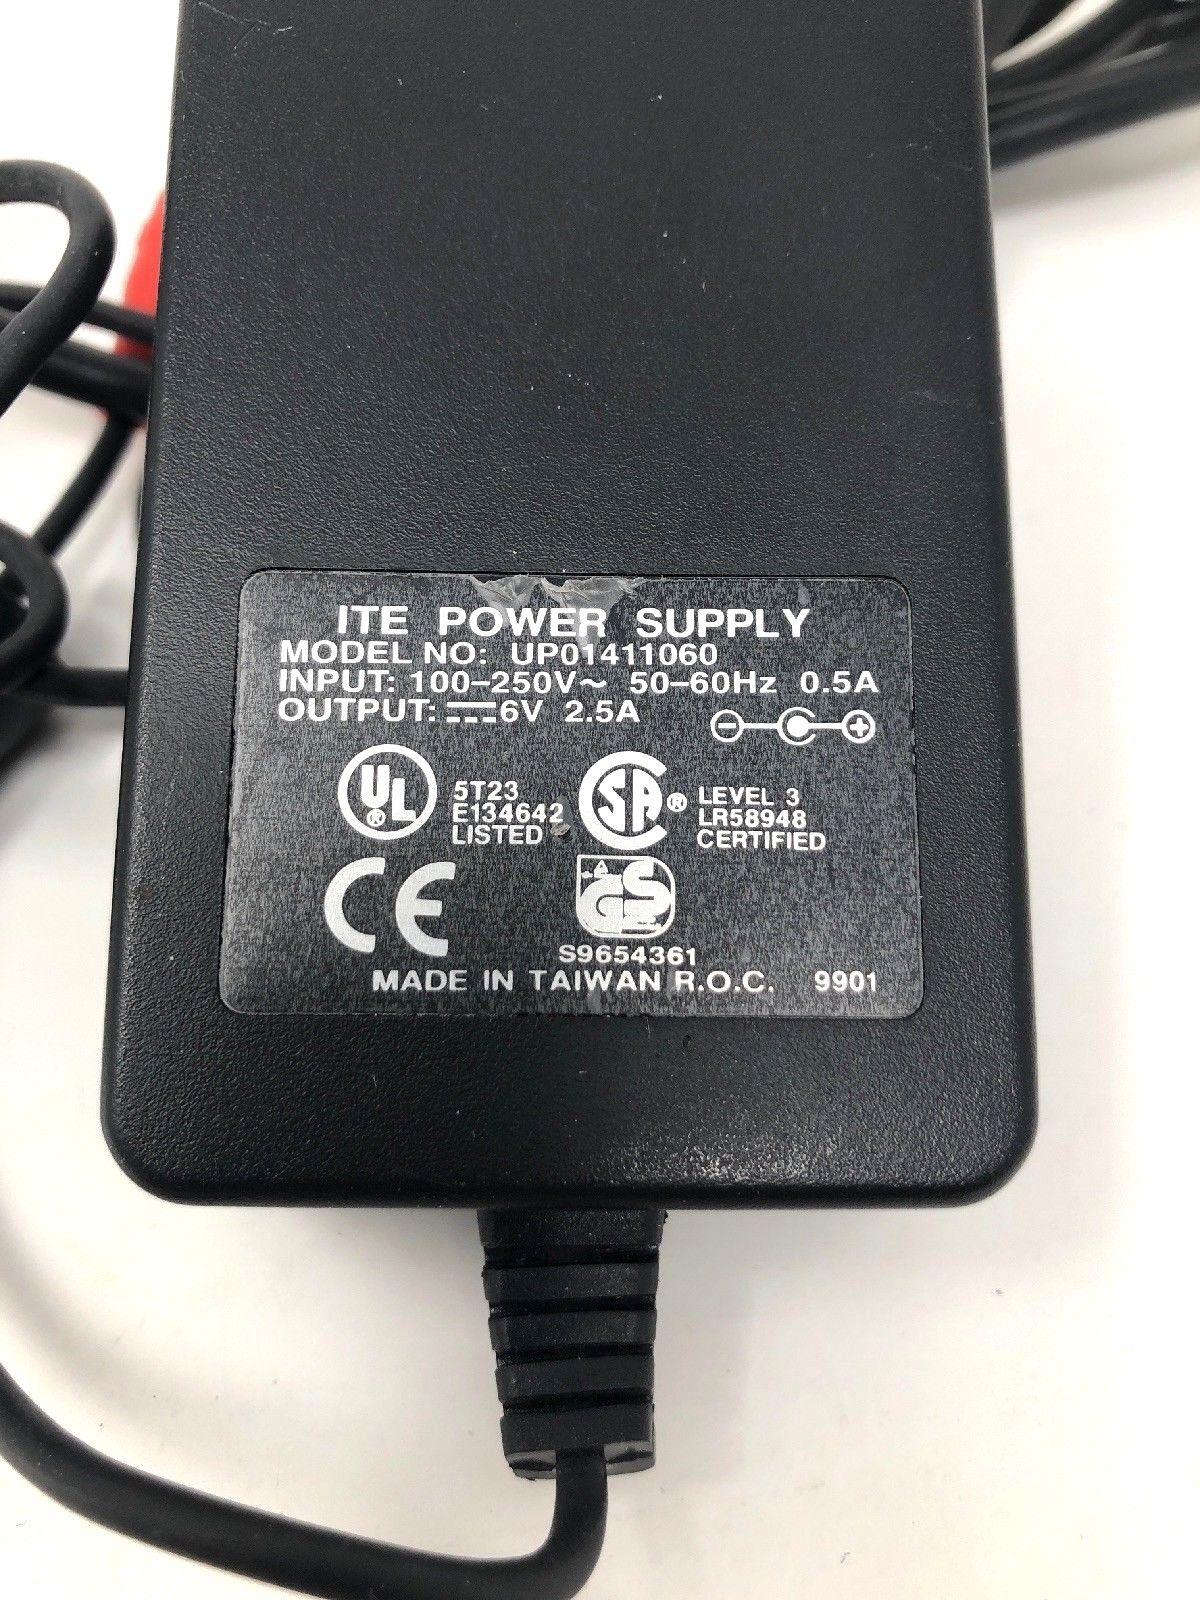 NEW ITE UP01411060 Power Supply ac Adapter 6V 2.5A